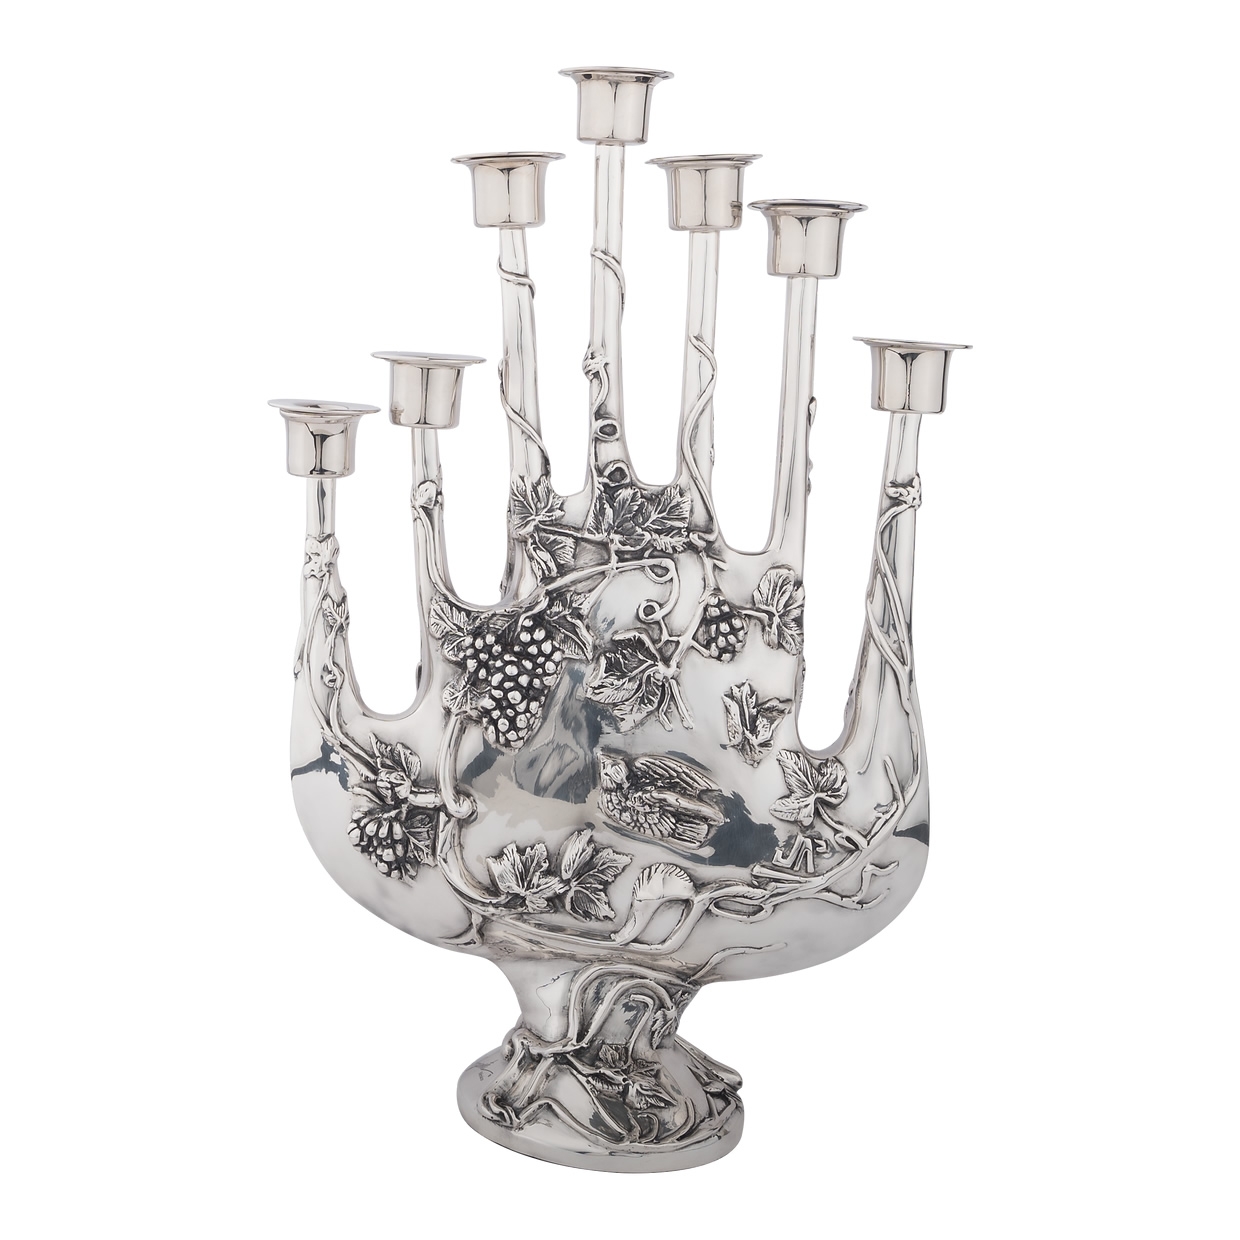 7 Arm Silver Candle Holder